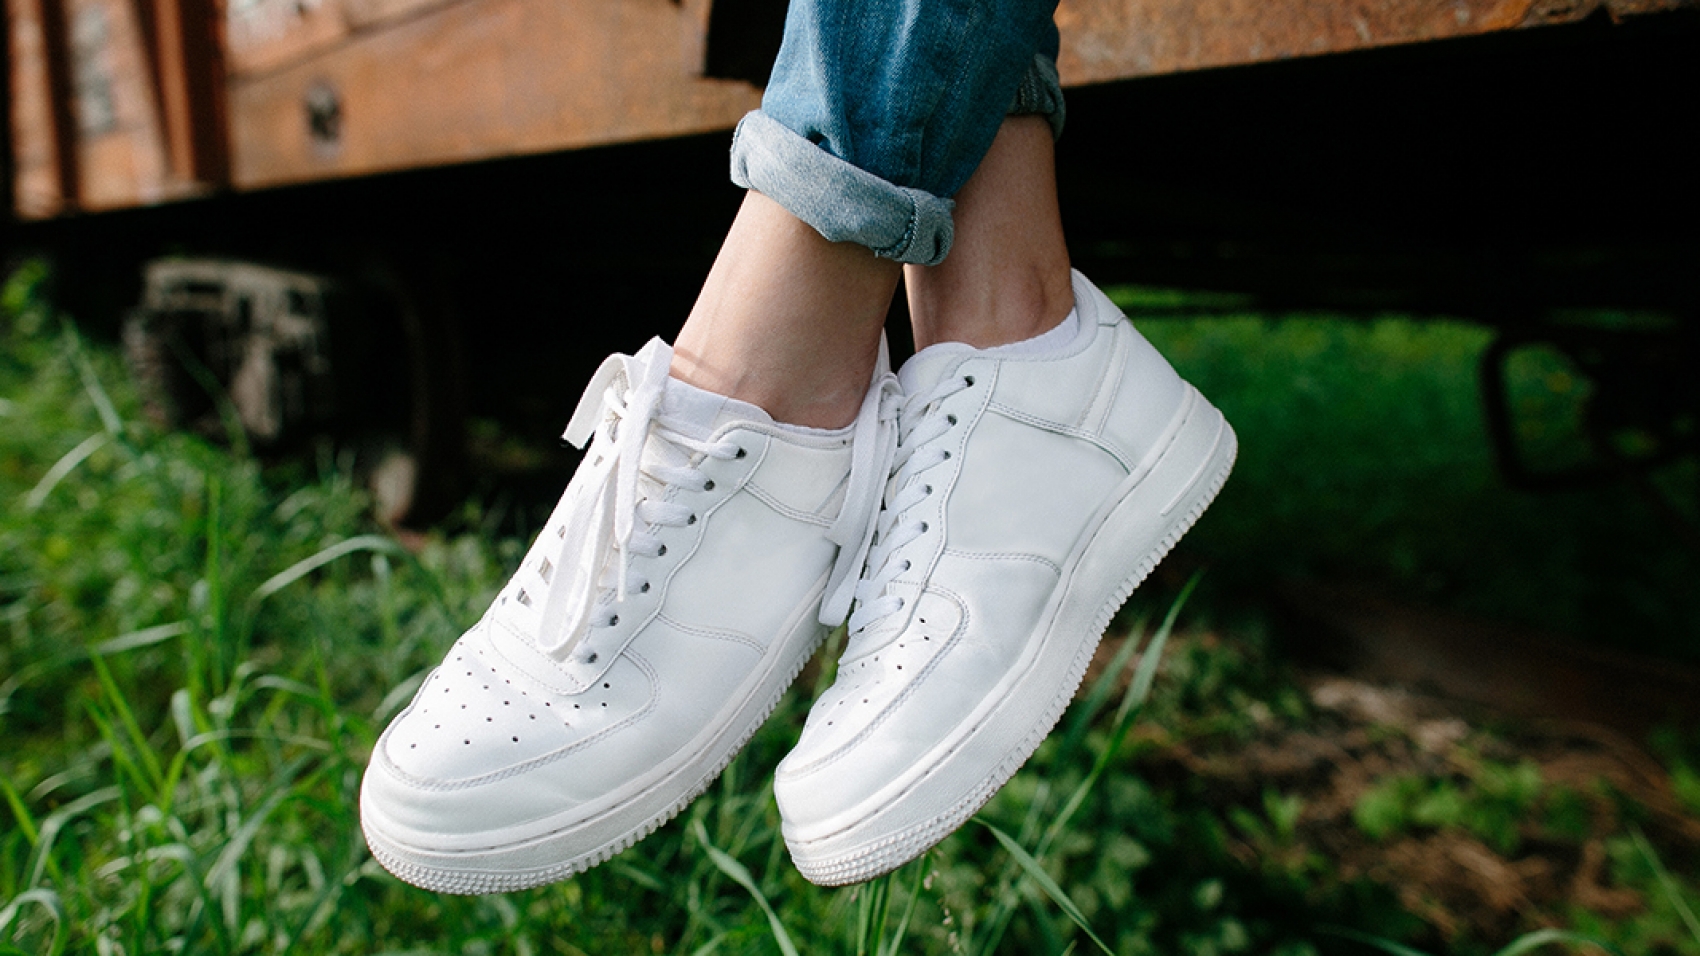 The-Best-White-Sneakers-for-Summer-and-Cute-Outfit-Ideas-for-How-to-Wear-Them